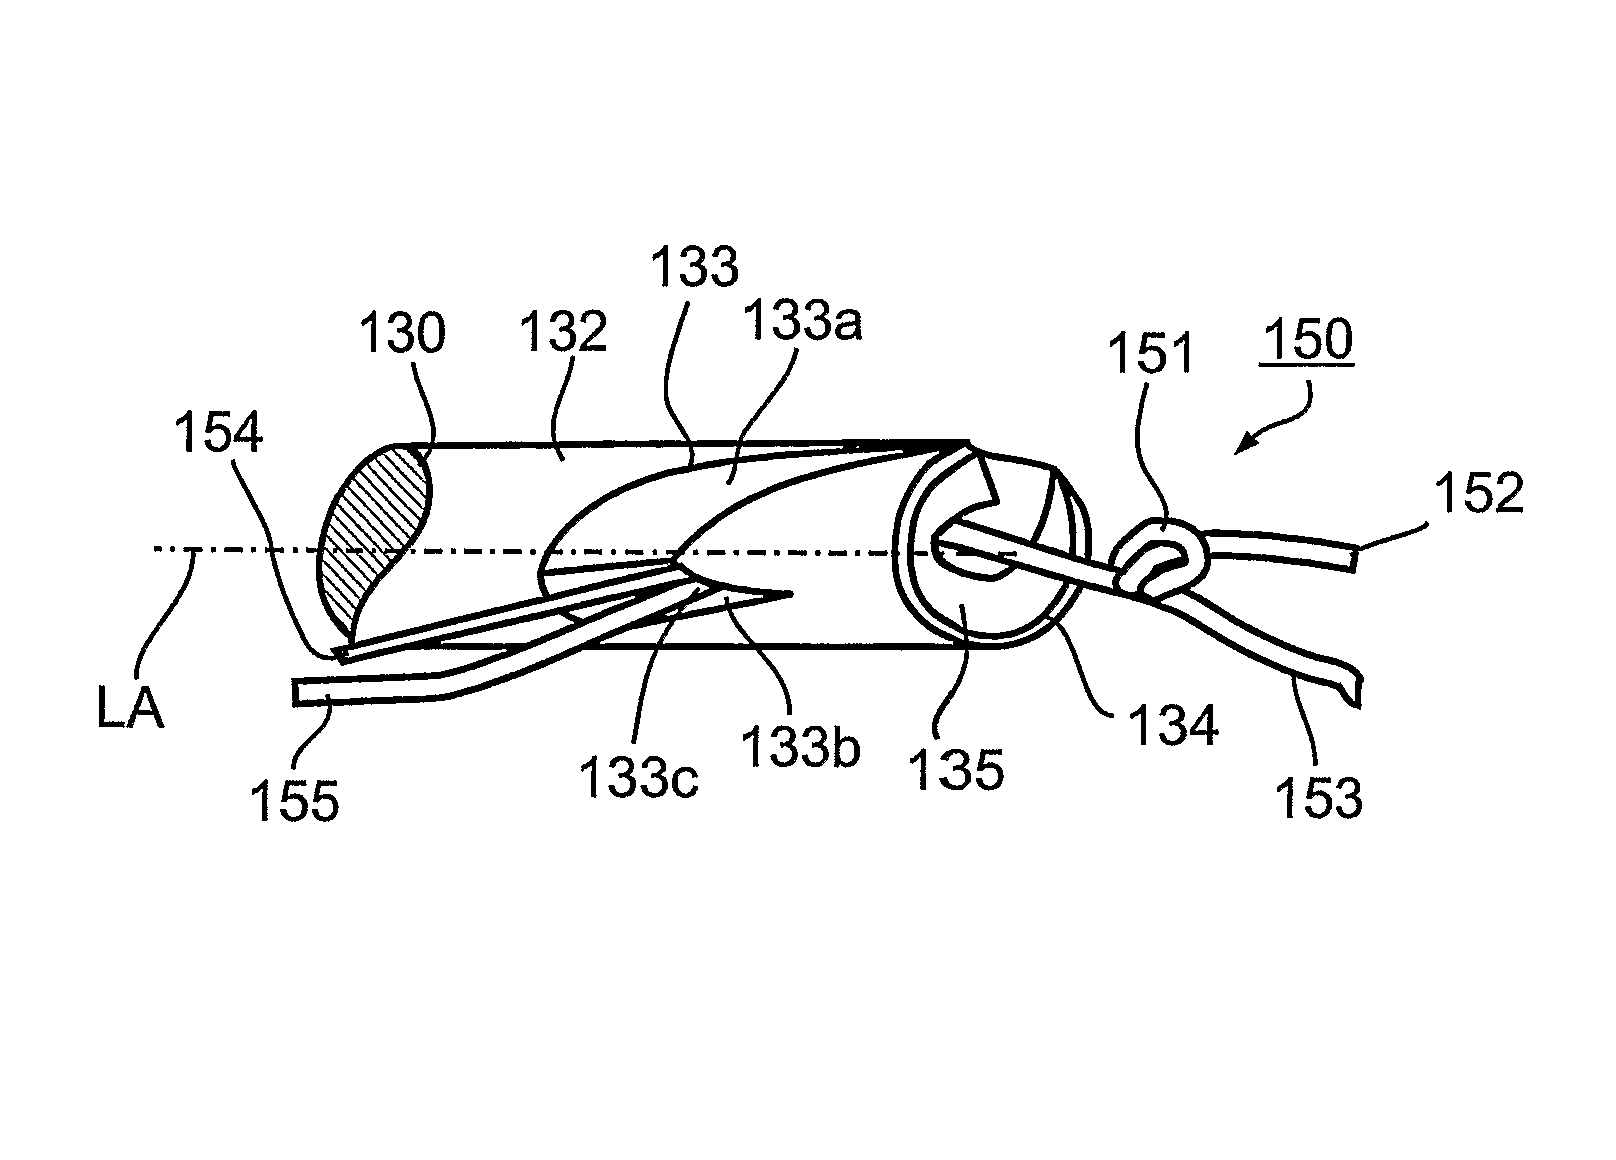 Suture manipulating and cutting implement